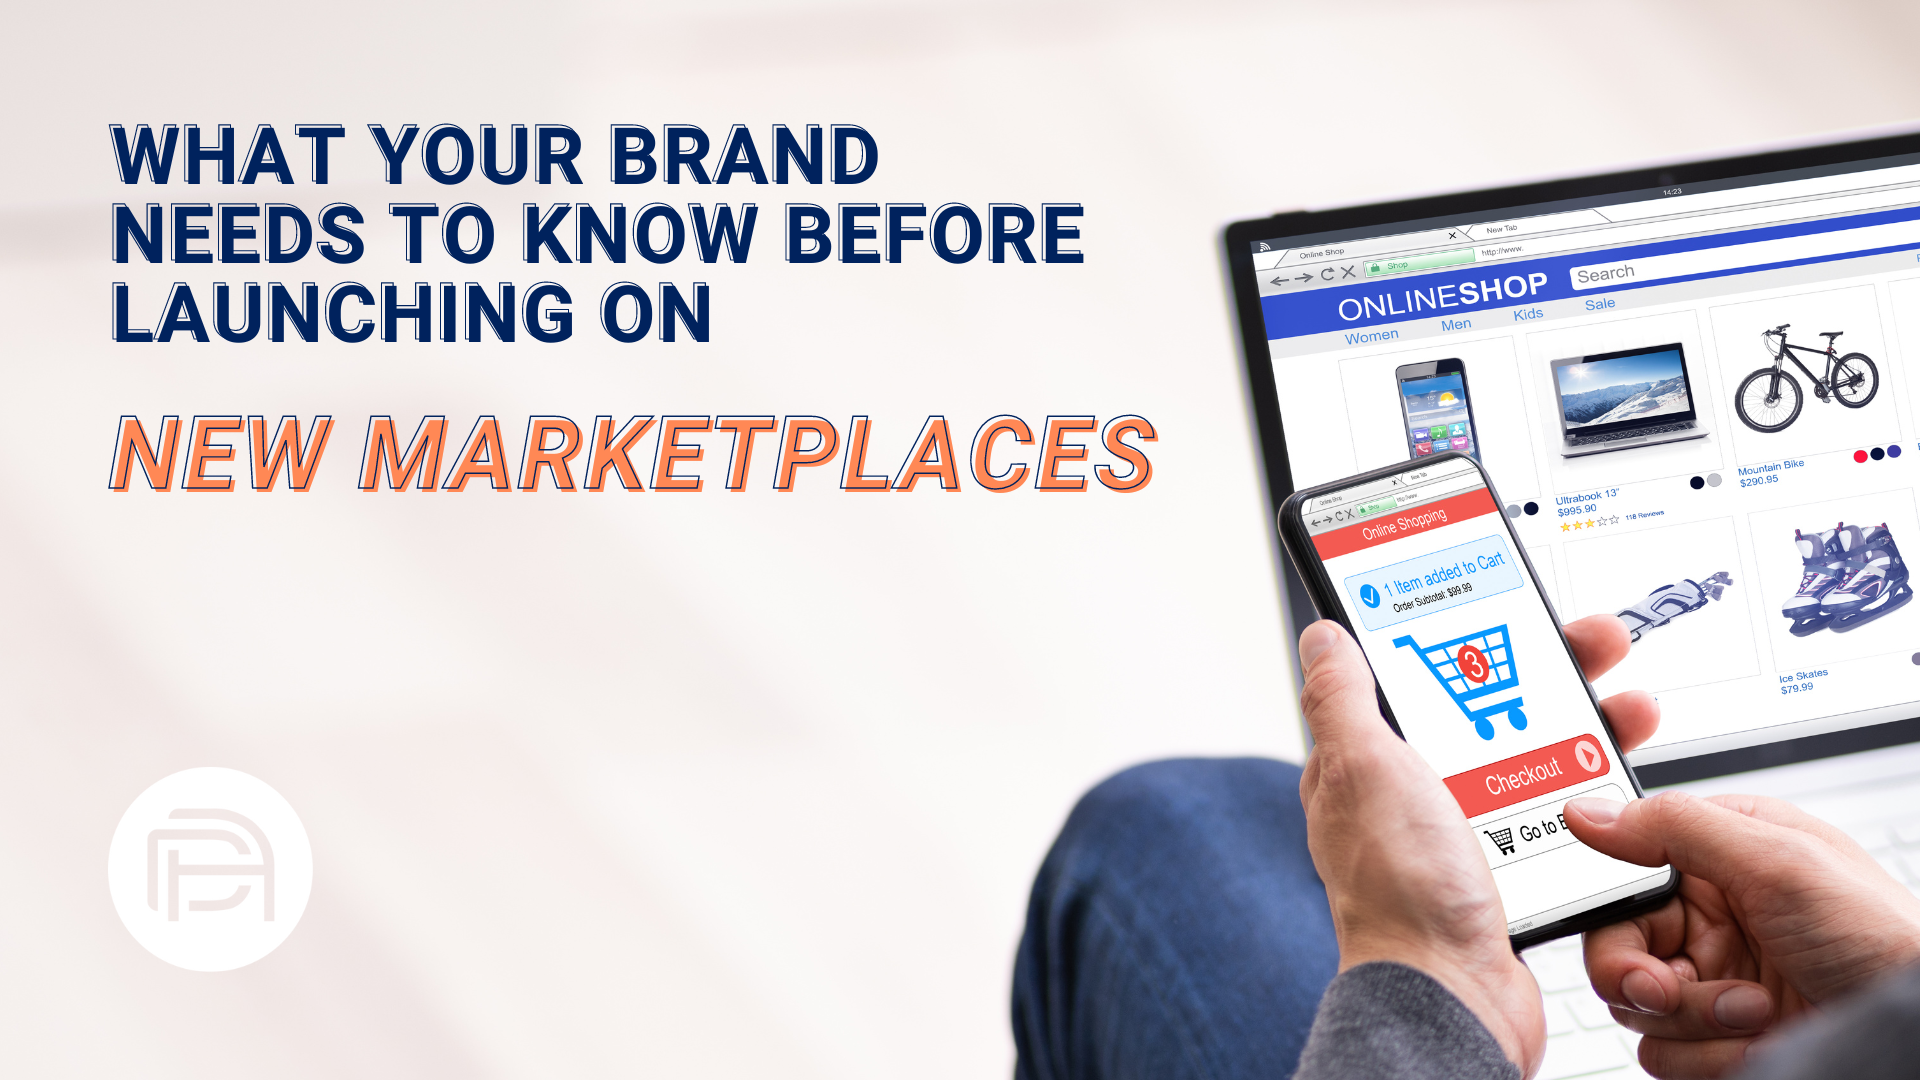 What Your Brand Needs to Know Before Launching on New Marketplaces